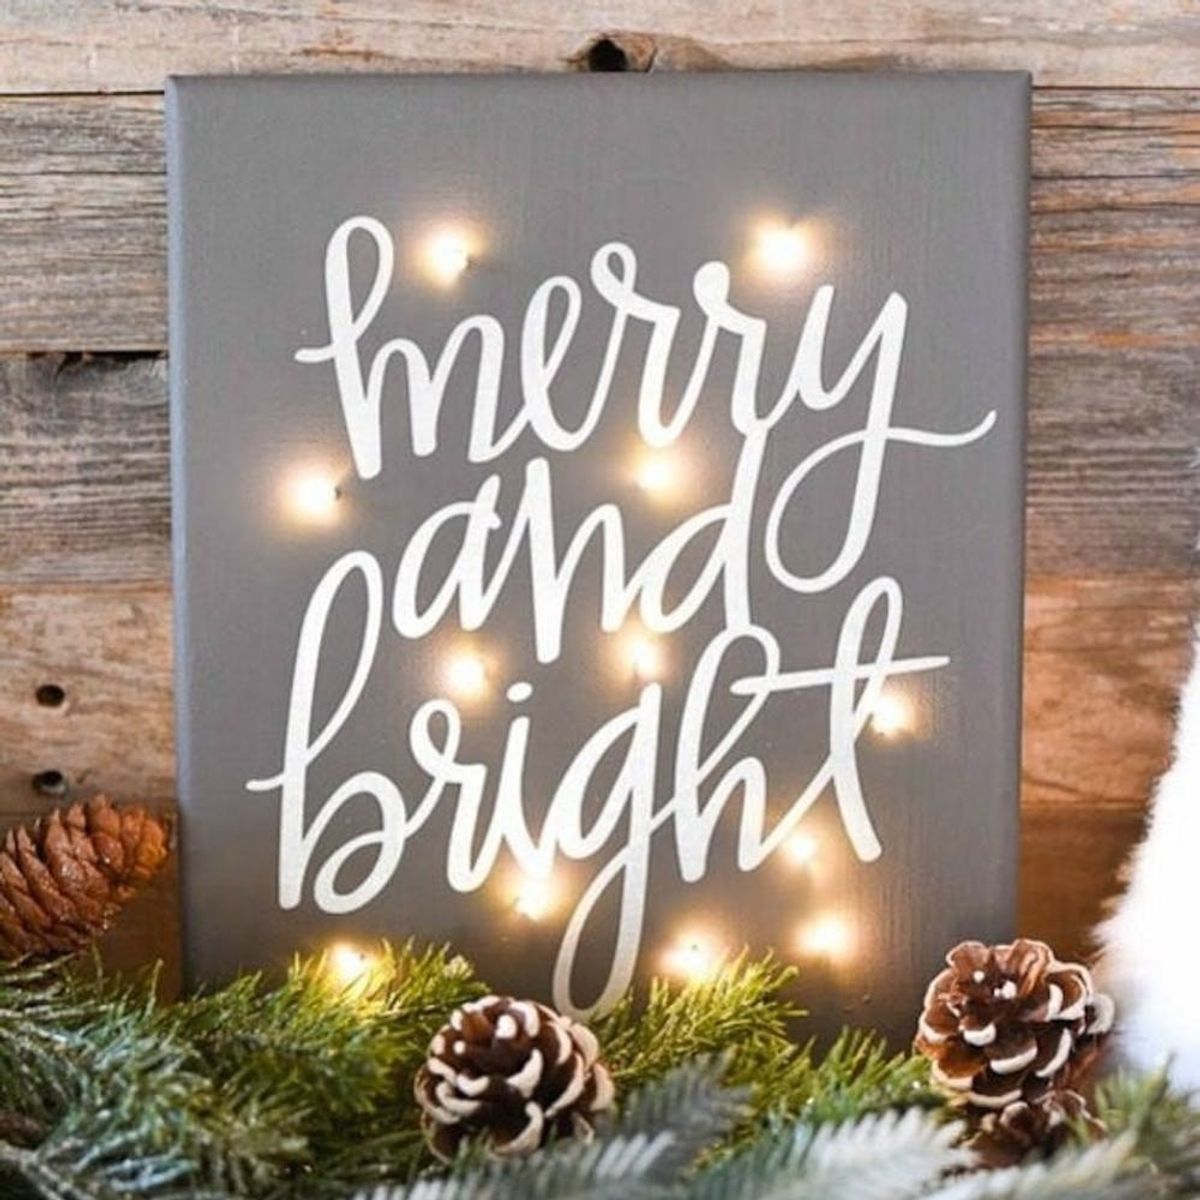 17 Twinkly Ways to Light Up Your Home With Christmas Fairy Lights